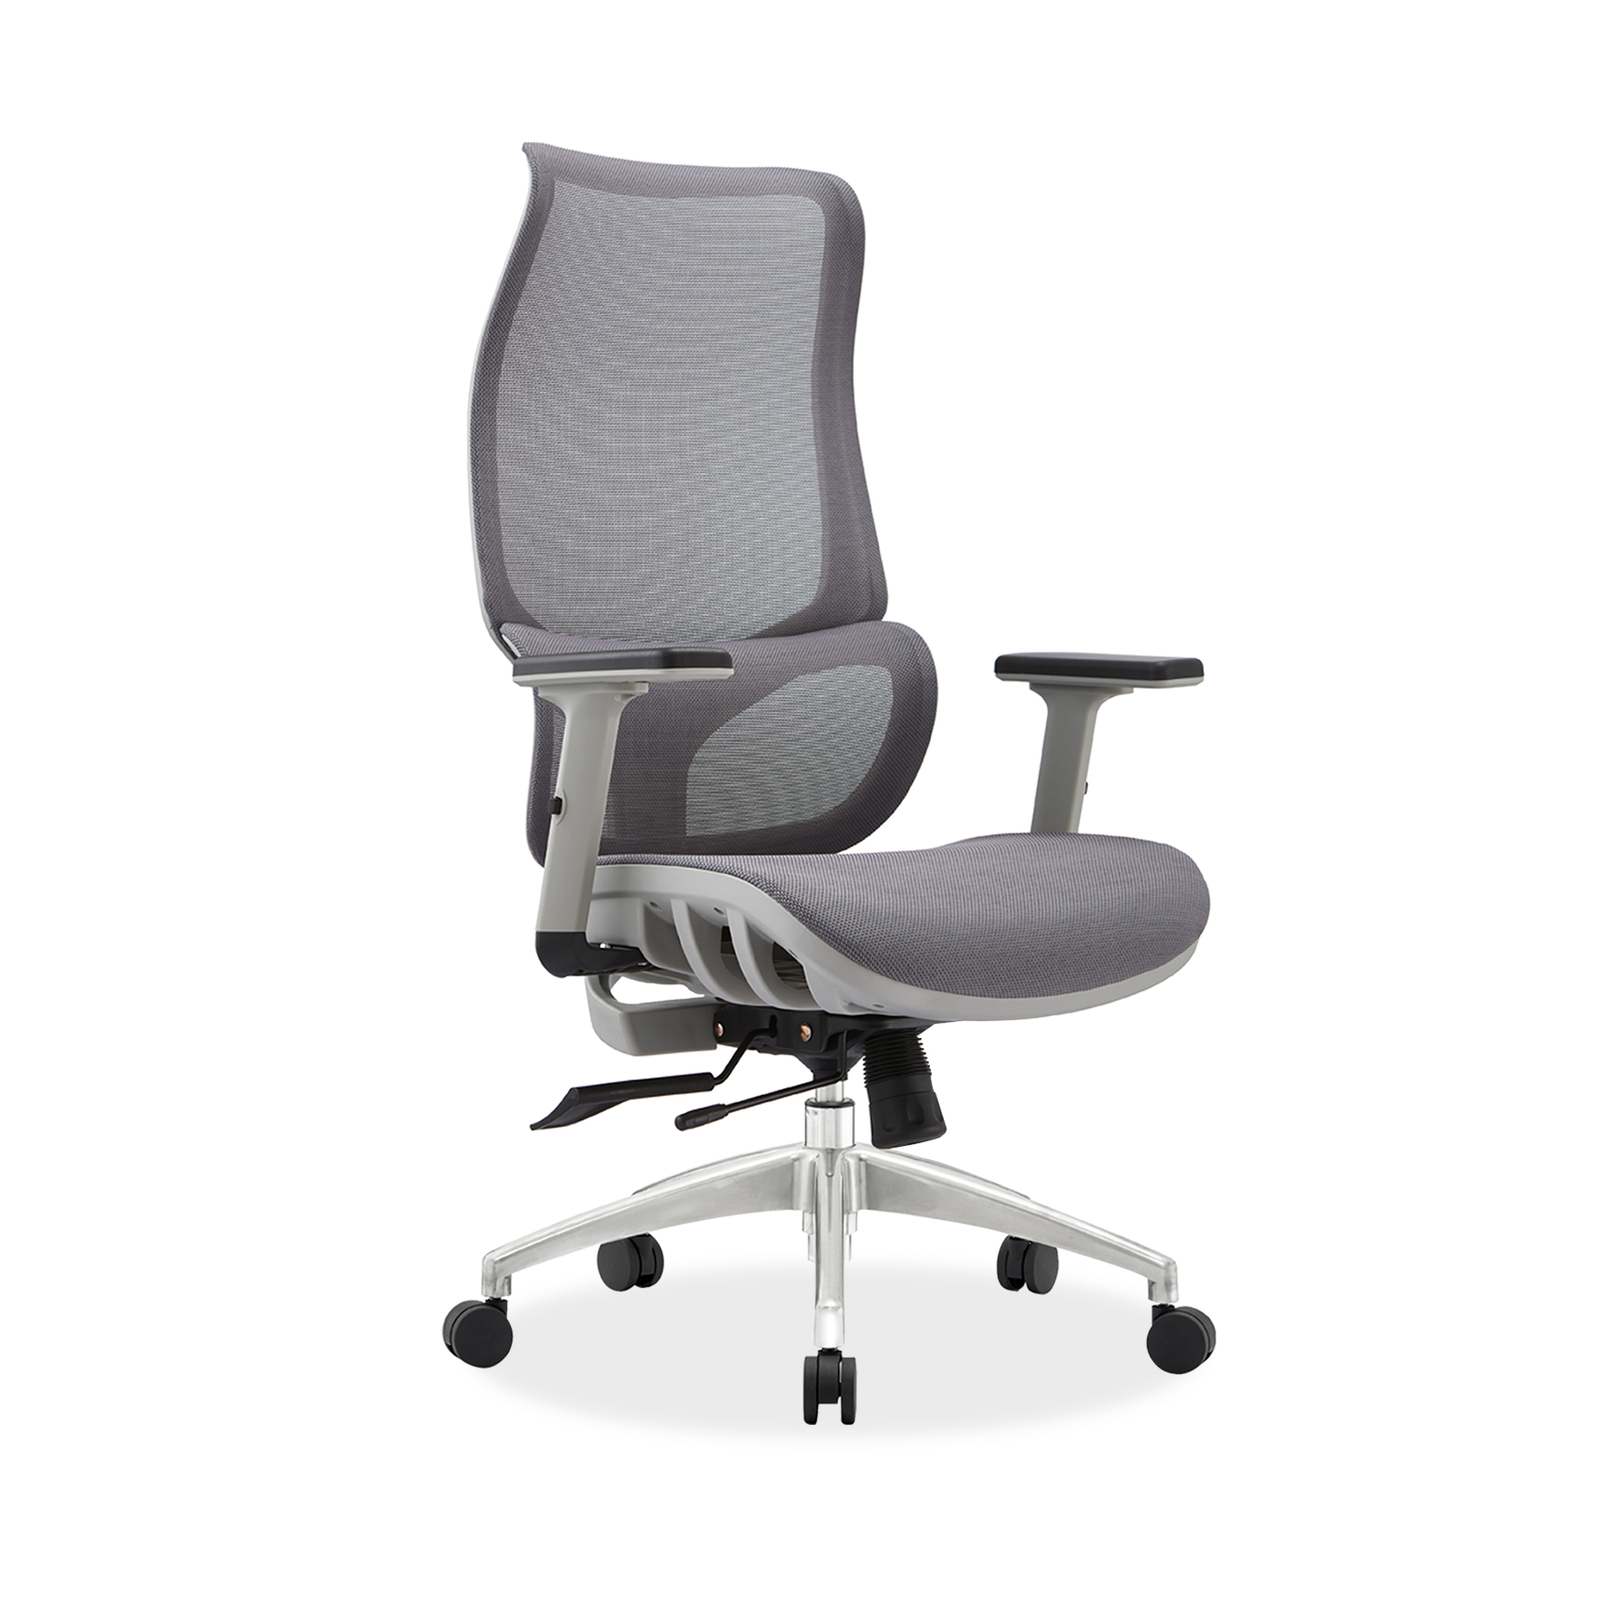 Ergonomic Office Chair Computer Gaming Mesh Executive Chairs Work Desk Seat Grey